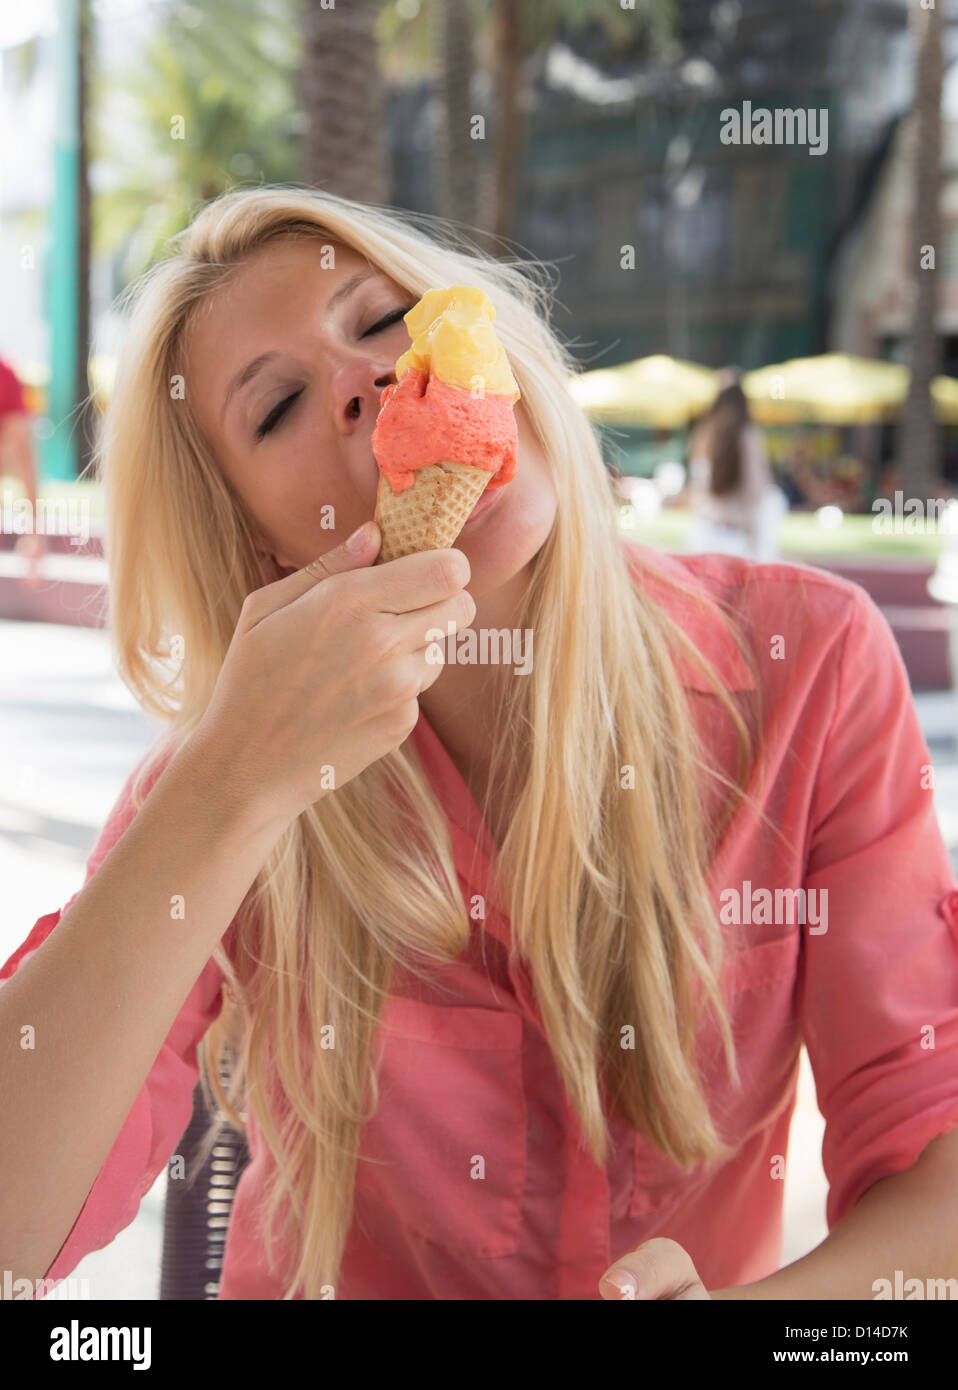 Woman eating ice cream cone outdoors Stock Photo